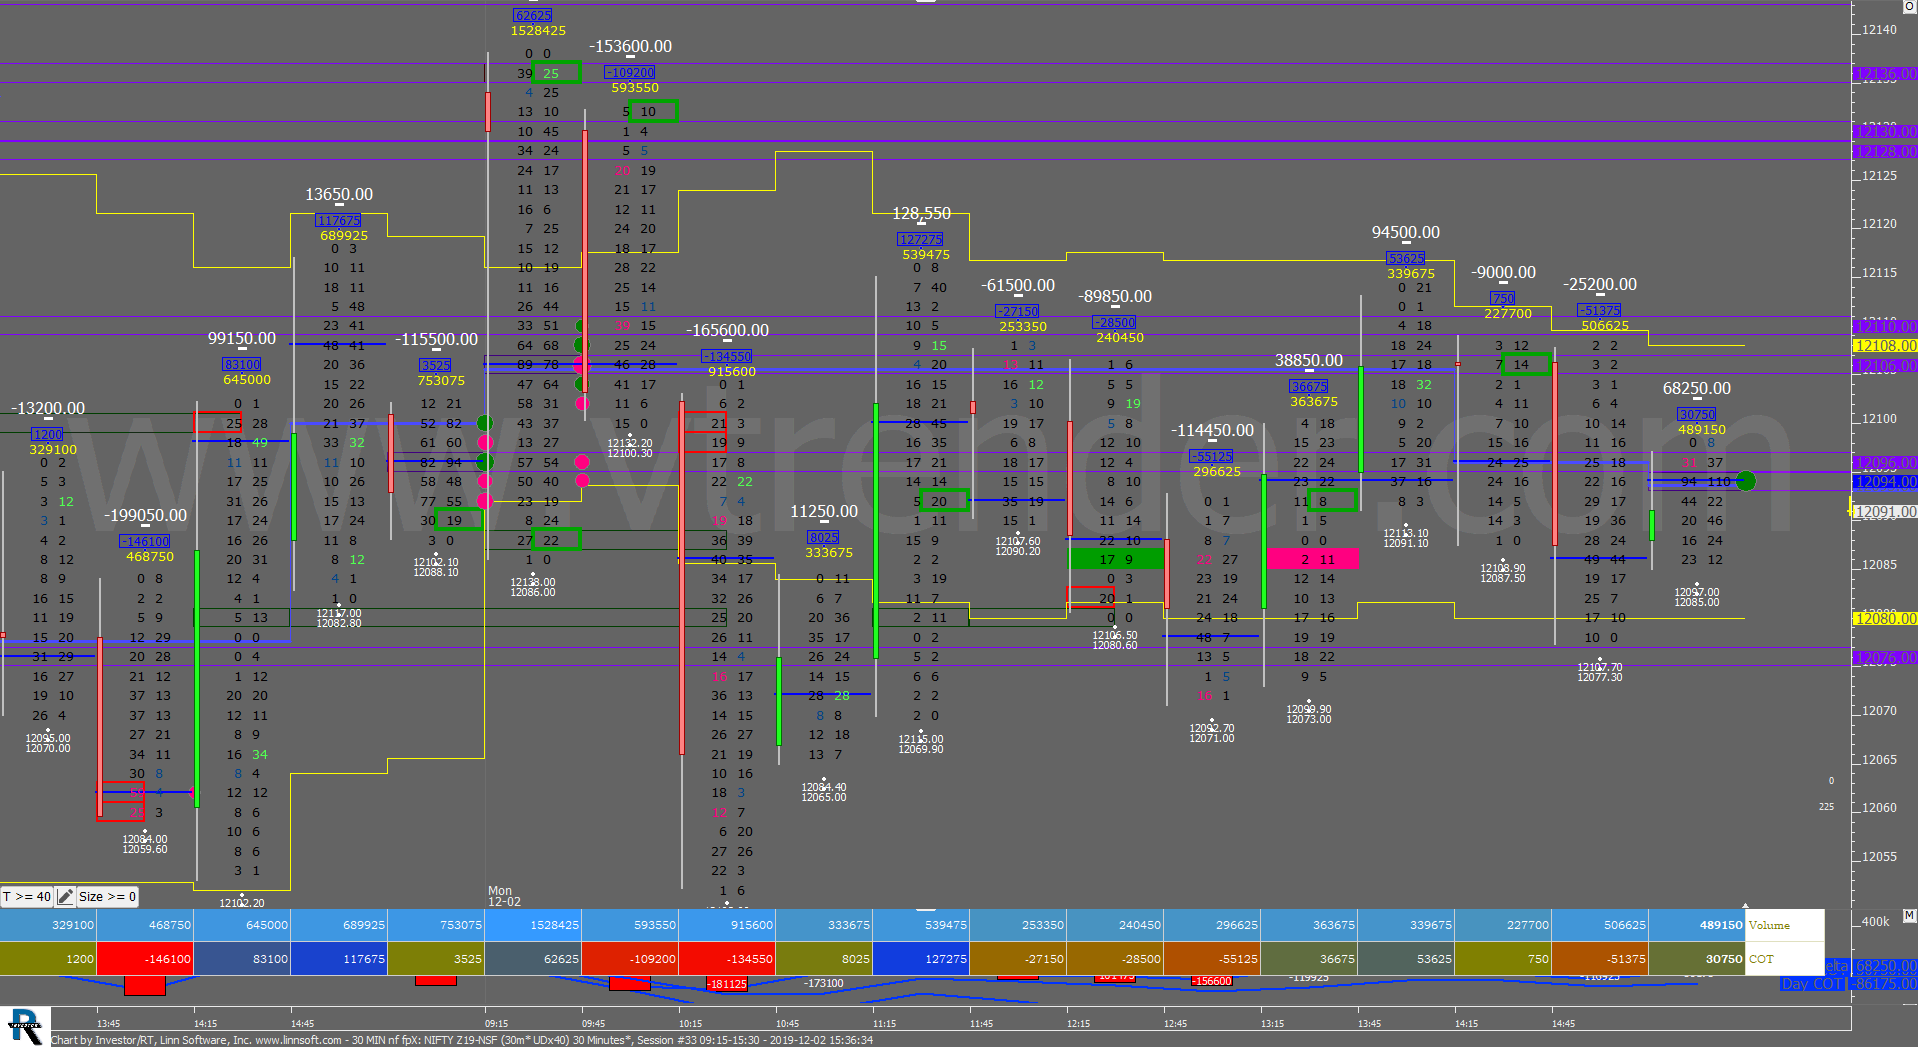 30 Min Nf Fpx 1 Order Flow Charts Dated 3Rd Dec Banknifty Futures, Day Trading, Intraday Trading, Intraday Trading Strategies, Nifty Futures, Order Flow Analysis, Support And Resistance, Trading Strategies, Volume Profile Trading